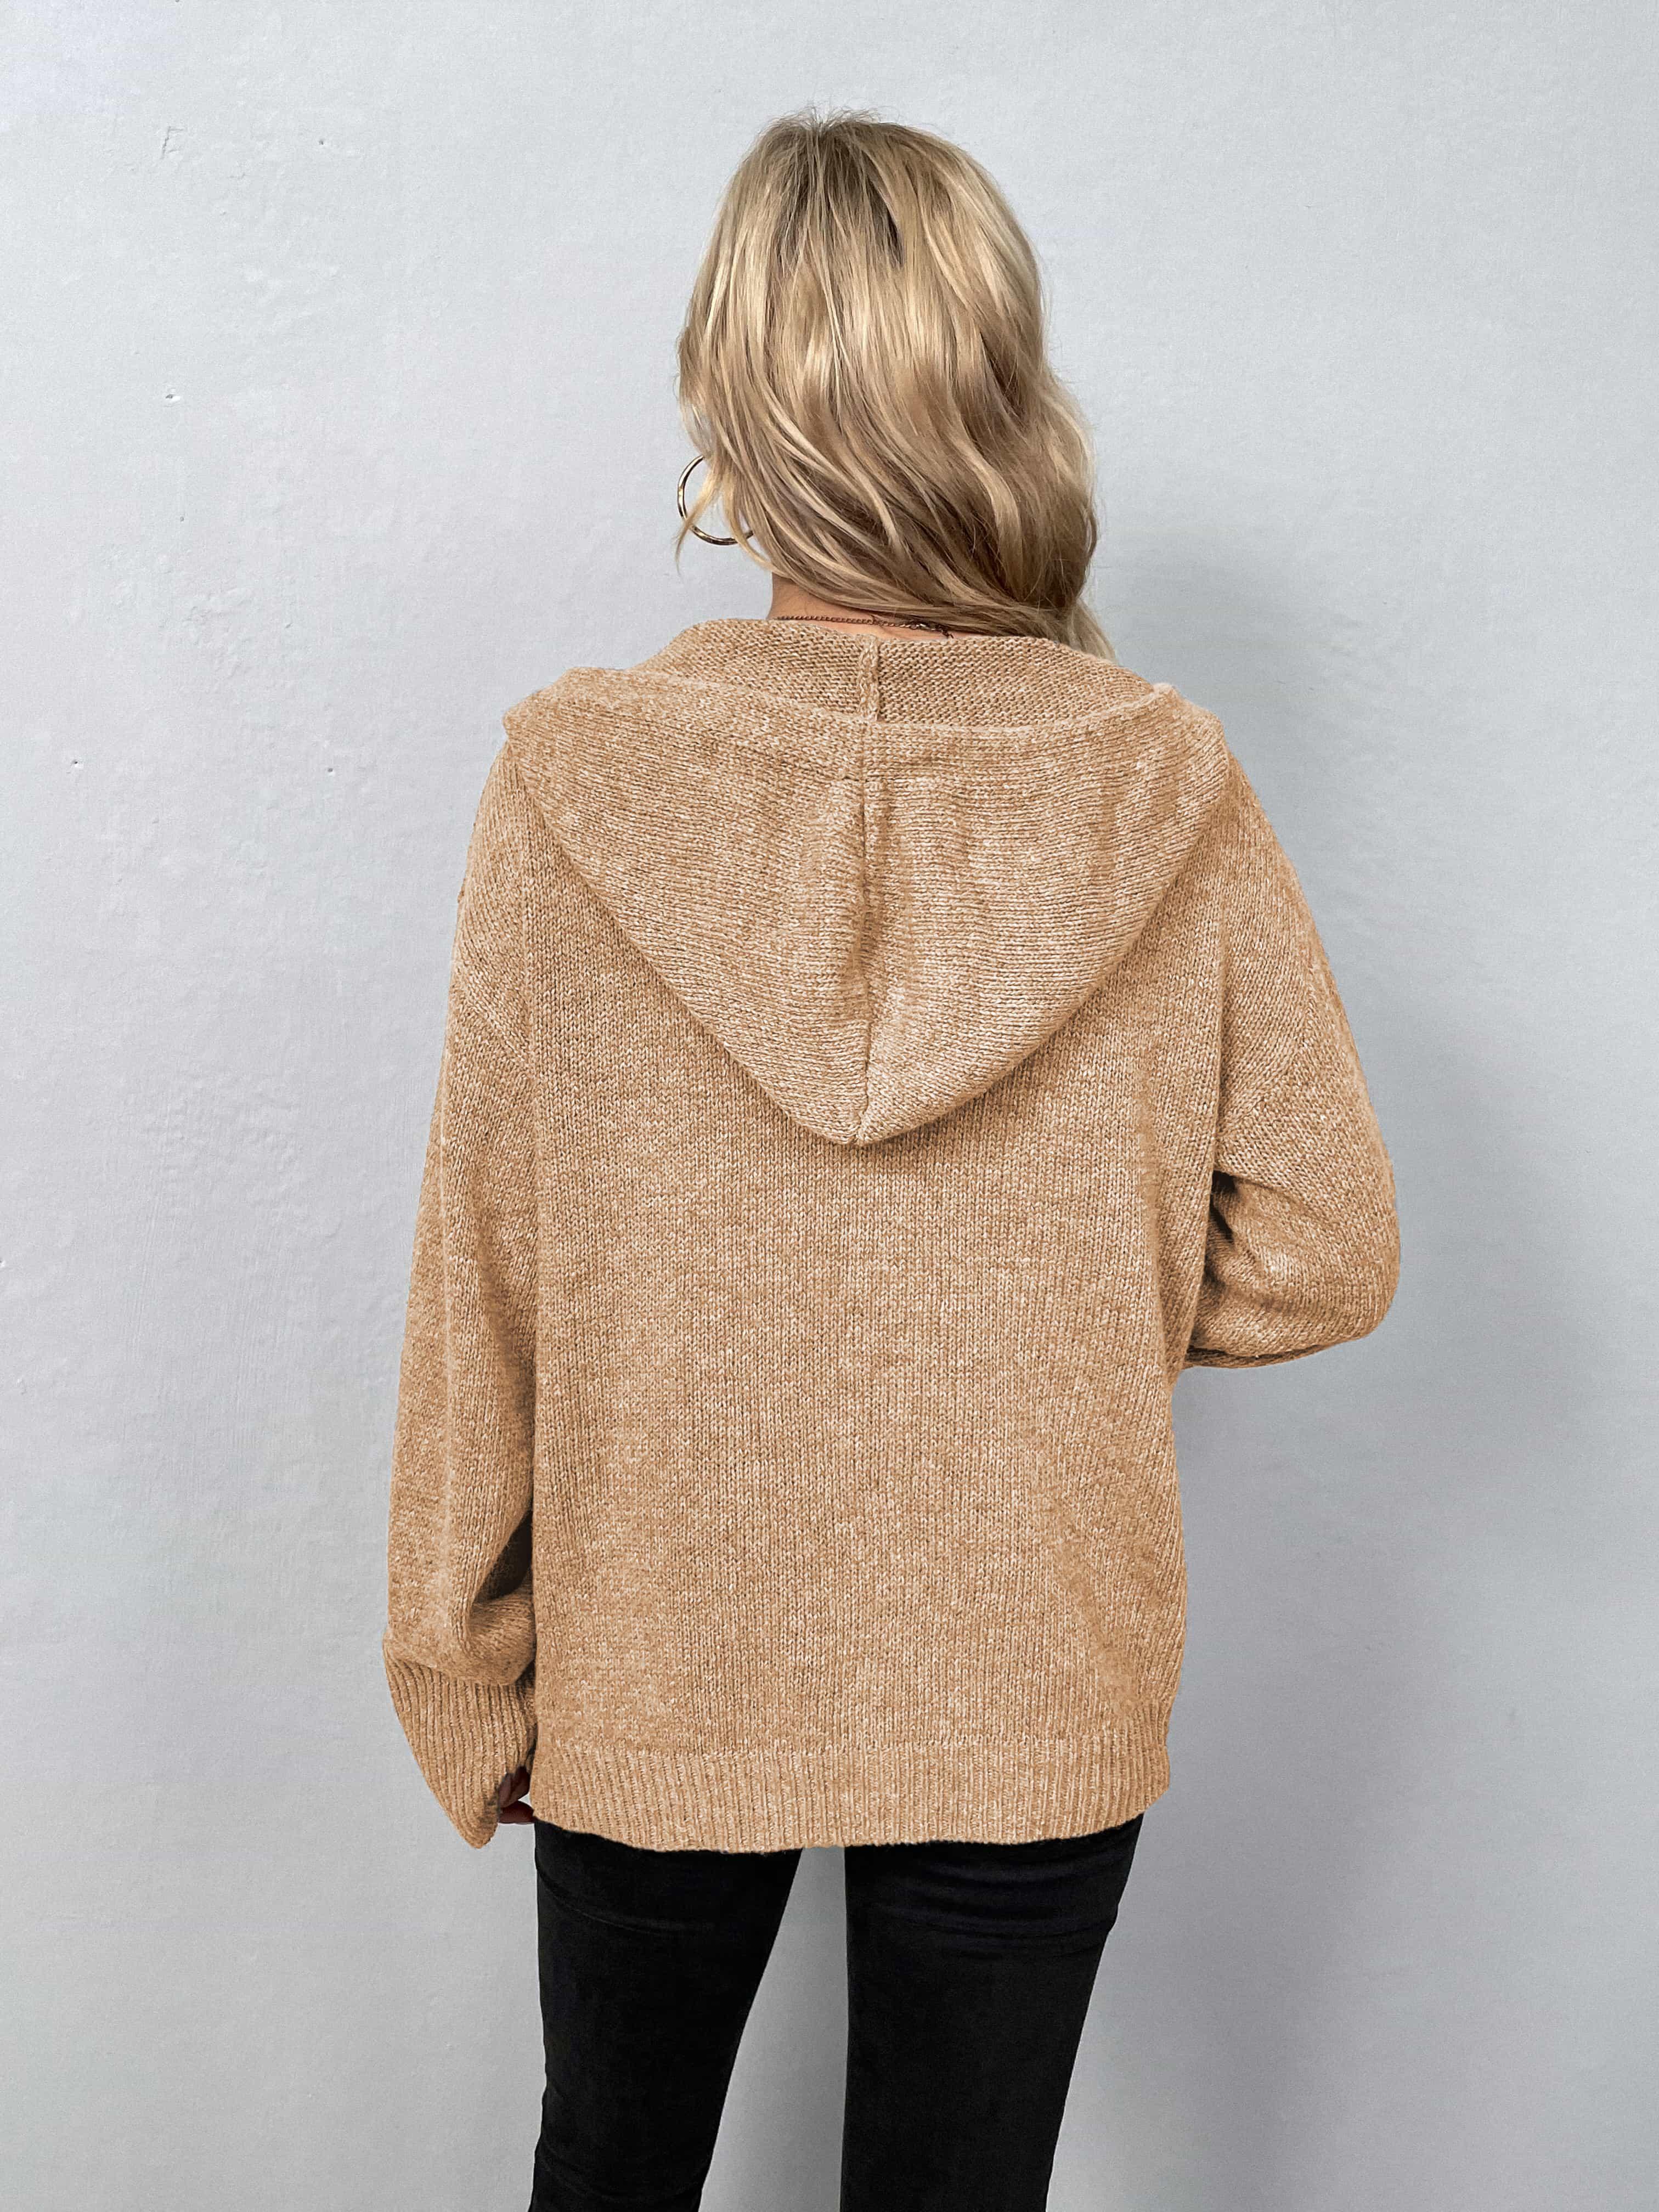 Women's Sweaters - Cardigans Button-Down Long Sleeve Hooded Sweater